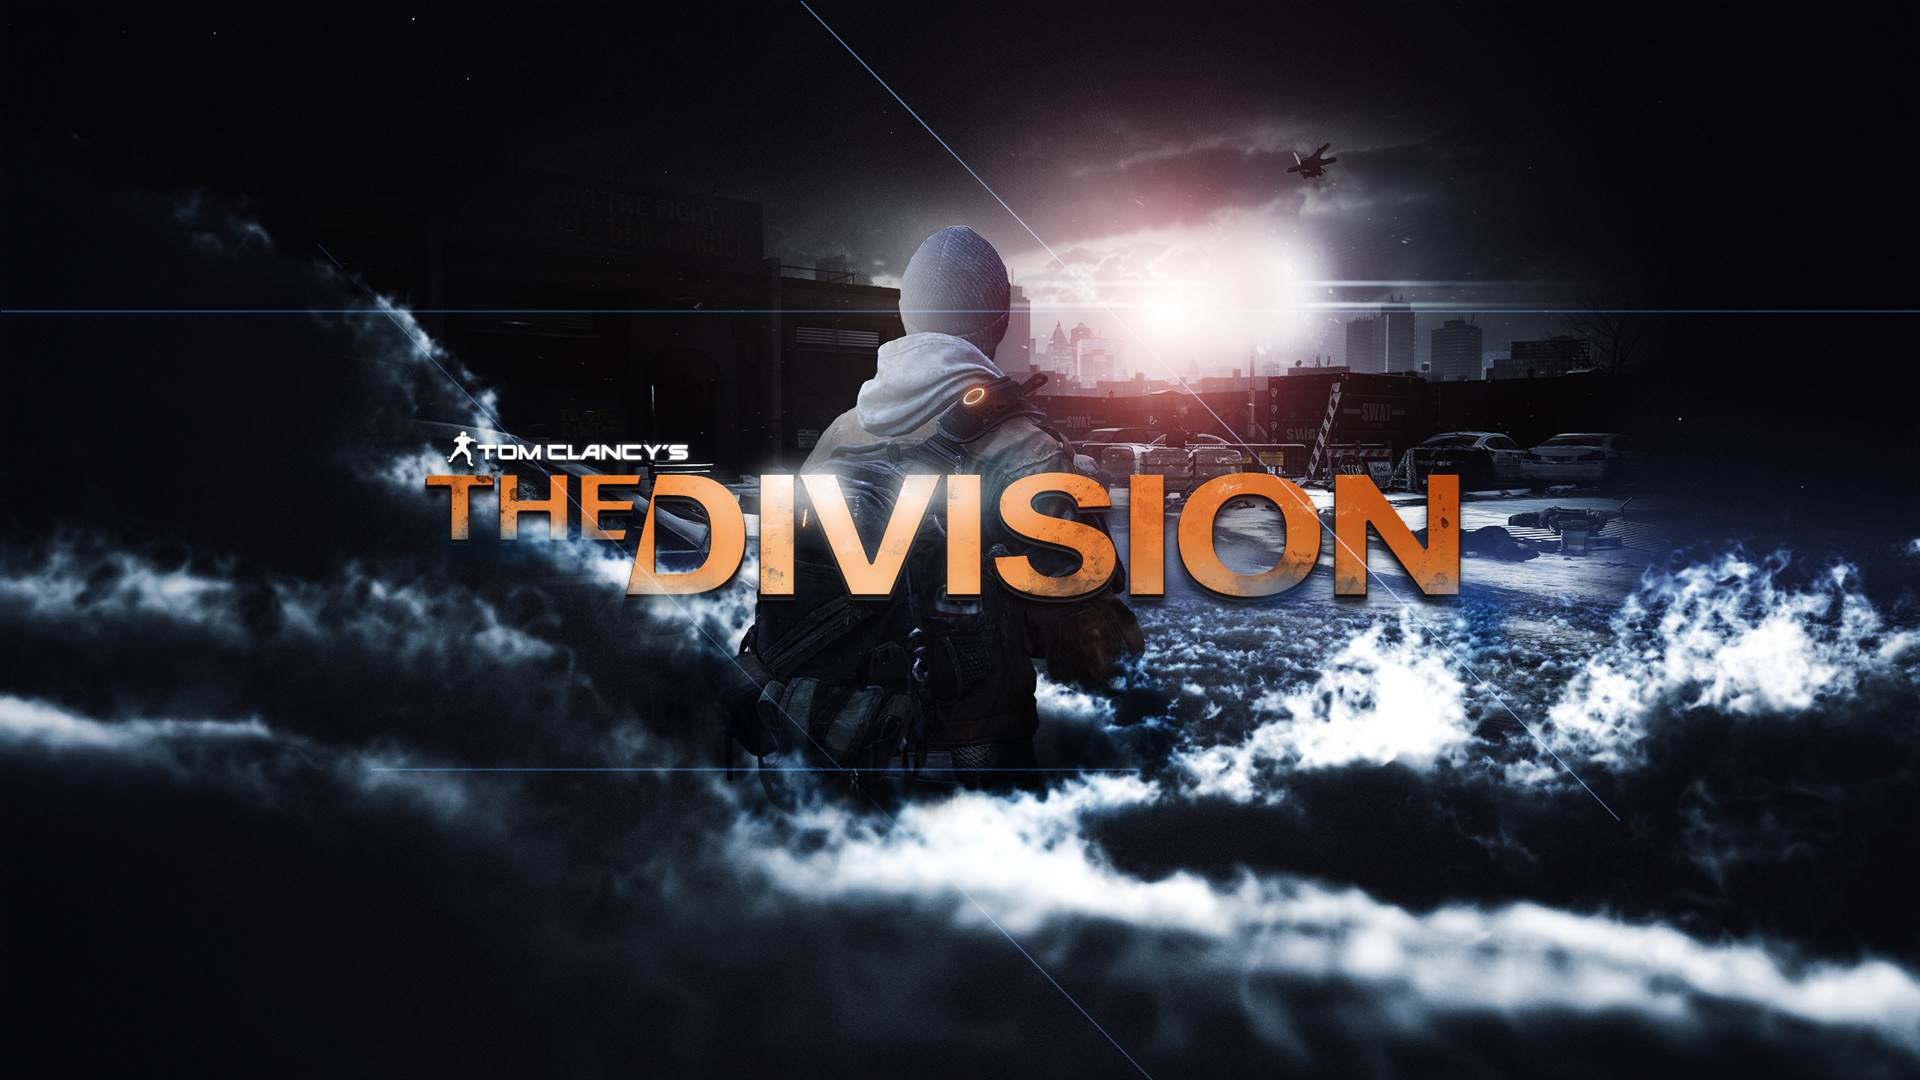 Tom Clancy's The Division Wallpaper in 1080P HD « Video Game News